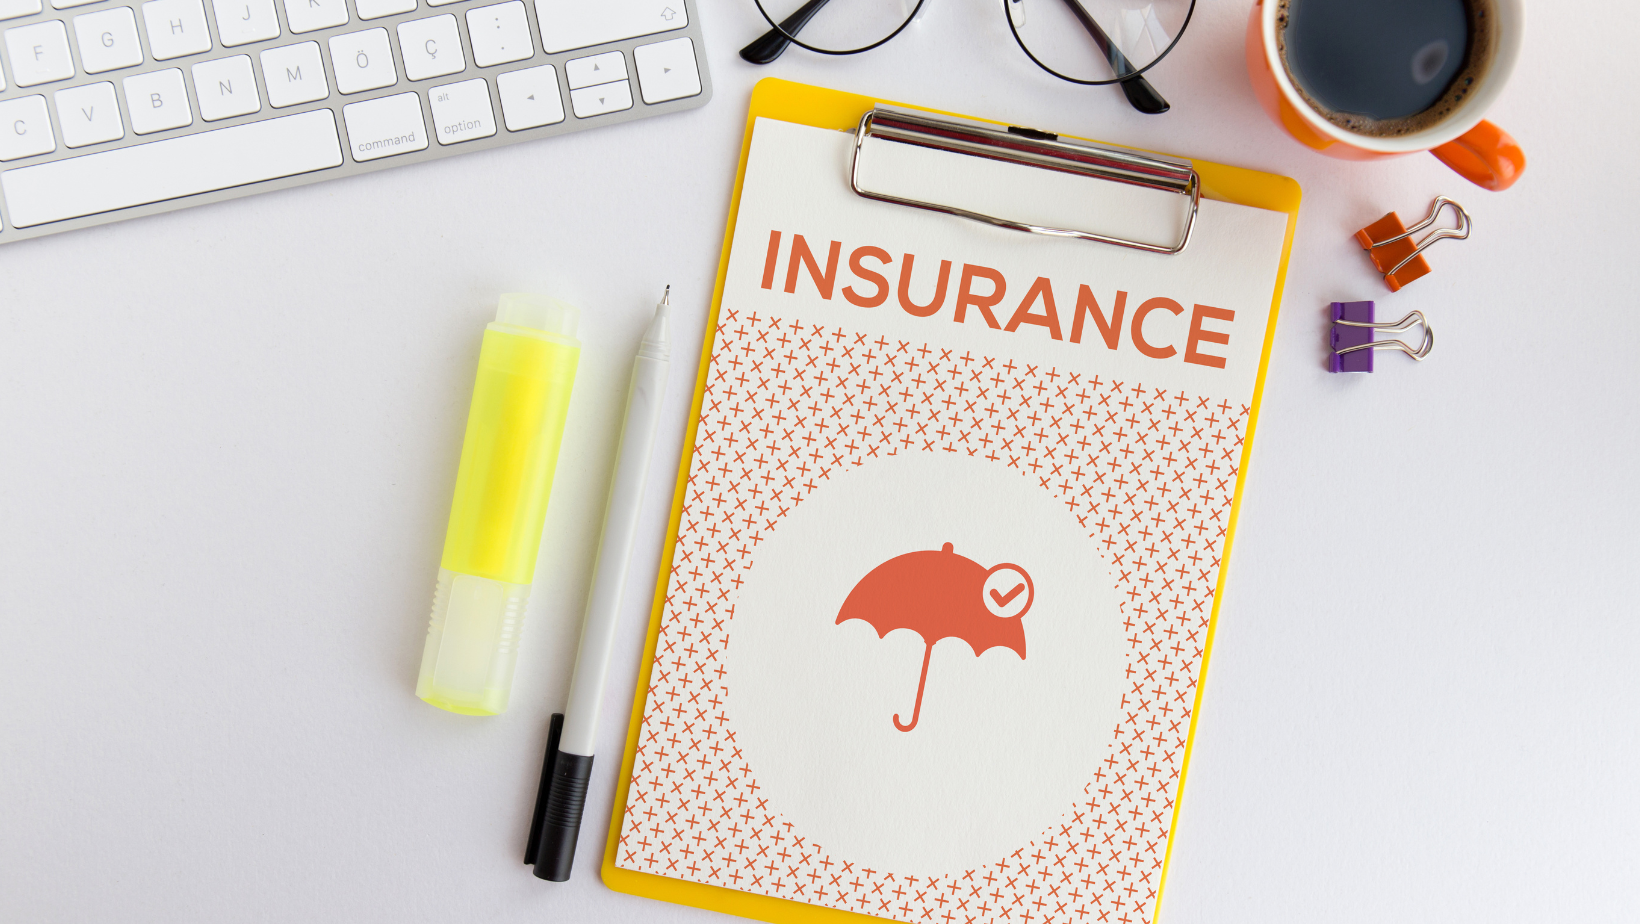 Types of insurance coverage available